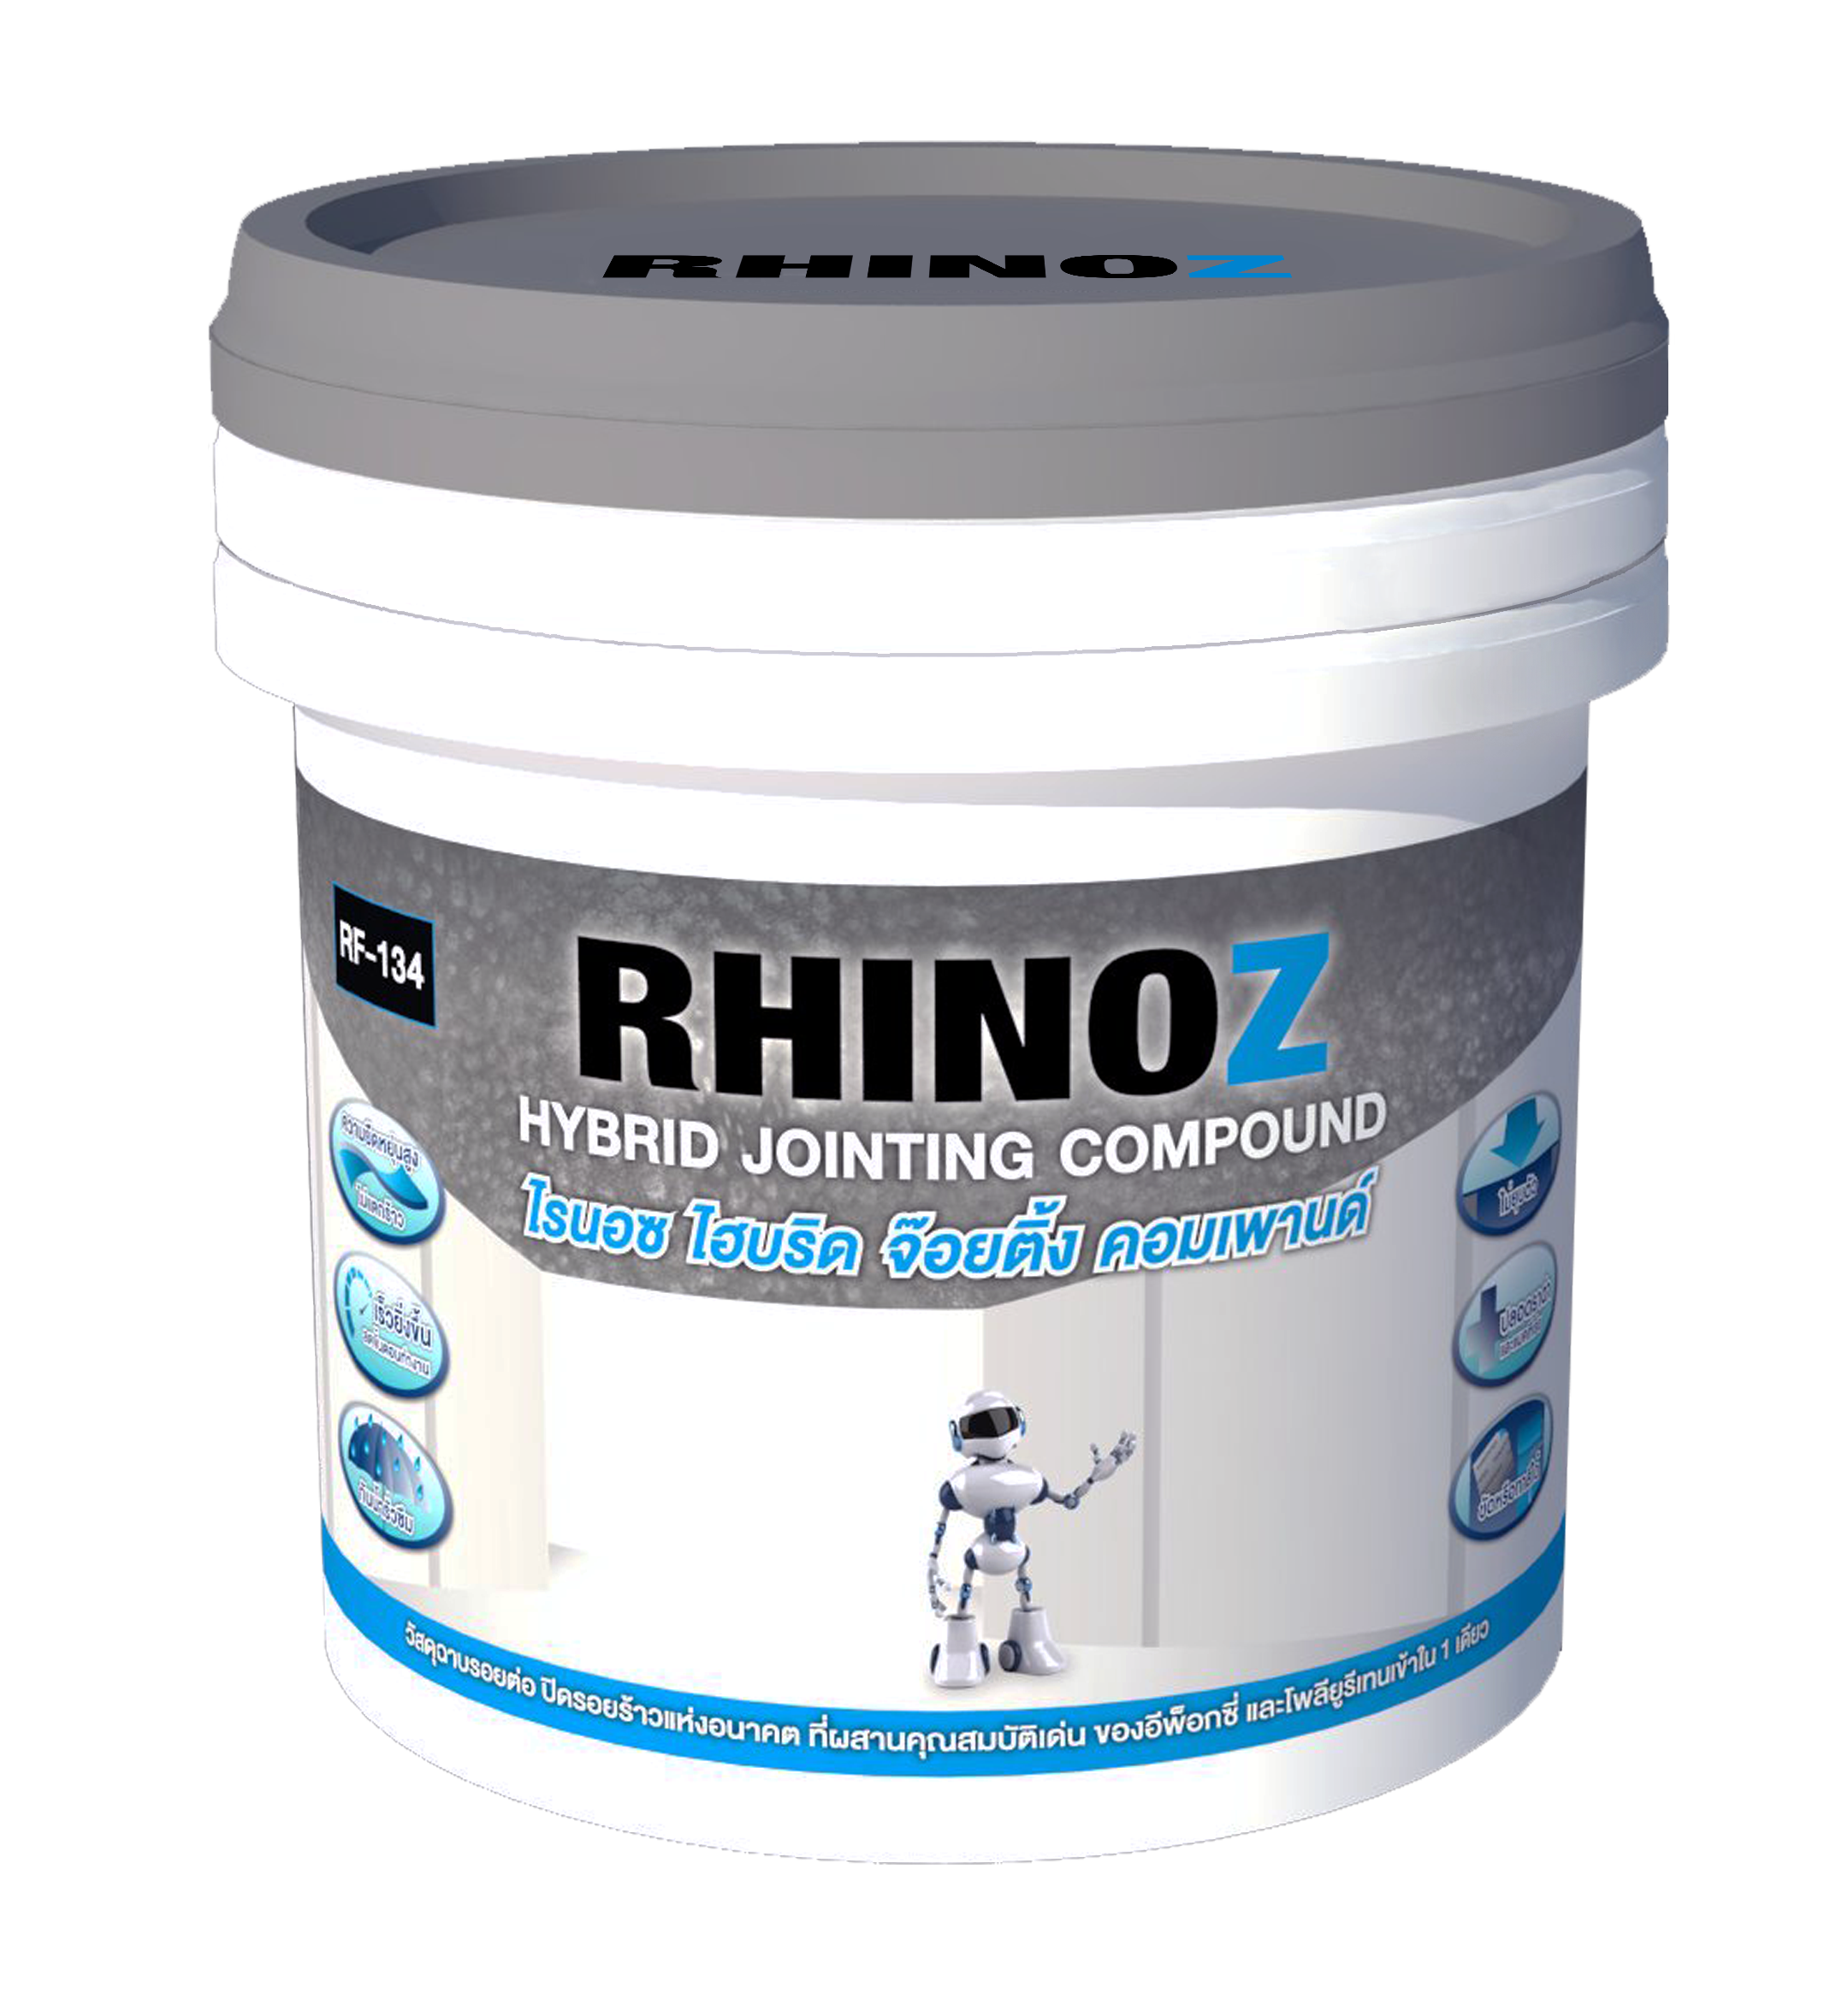 RF 134 Hybrid Jointing Compound 1kg per